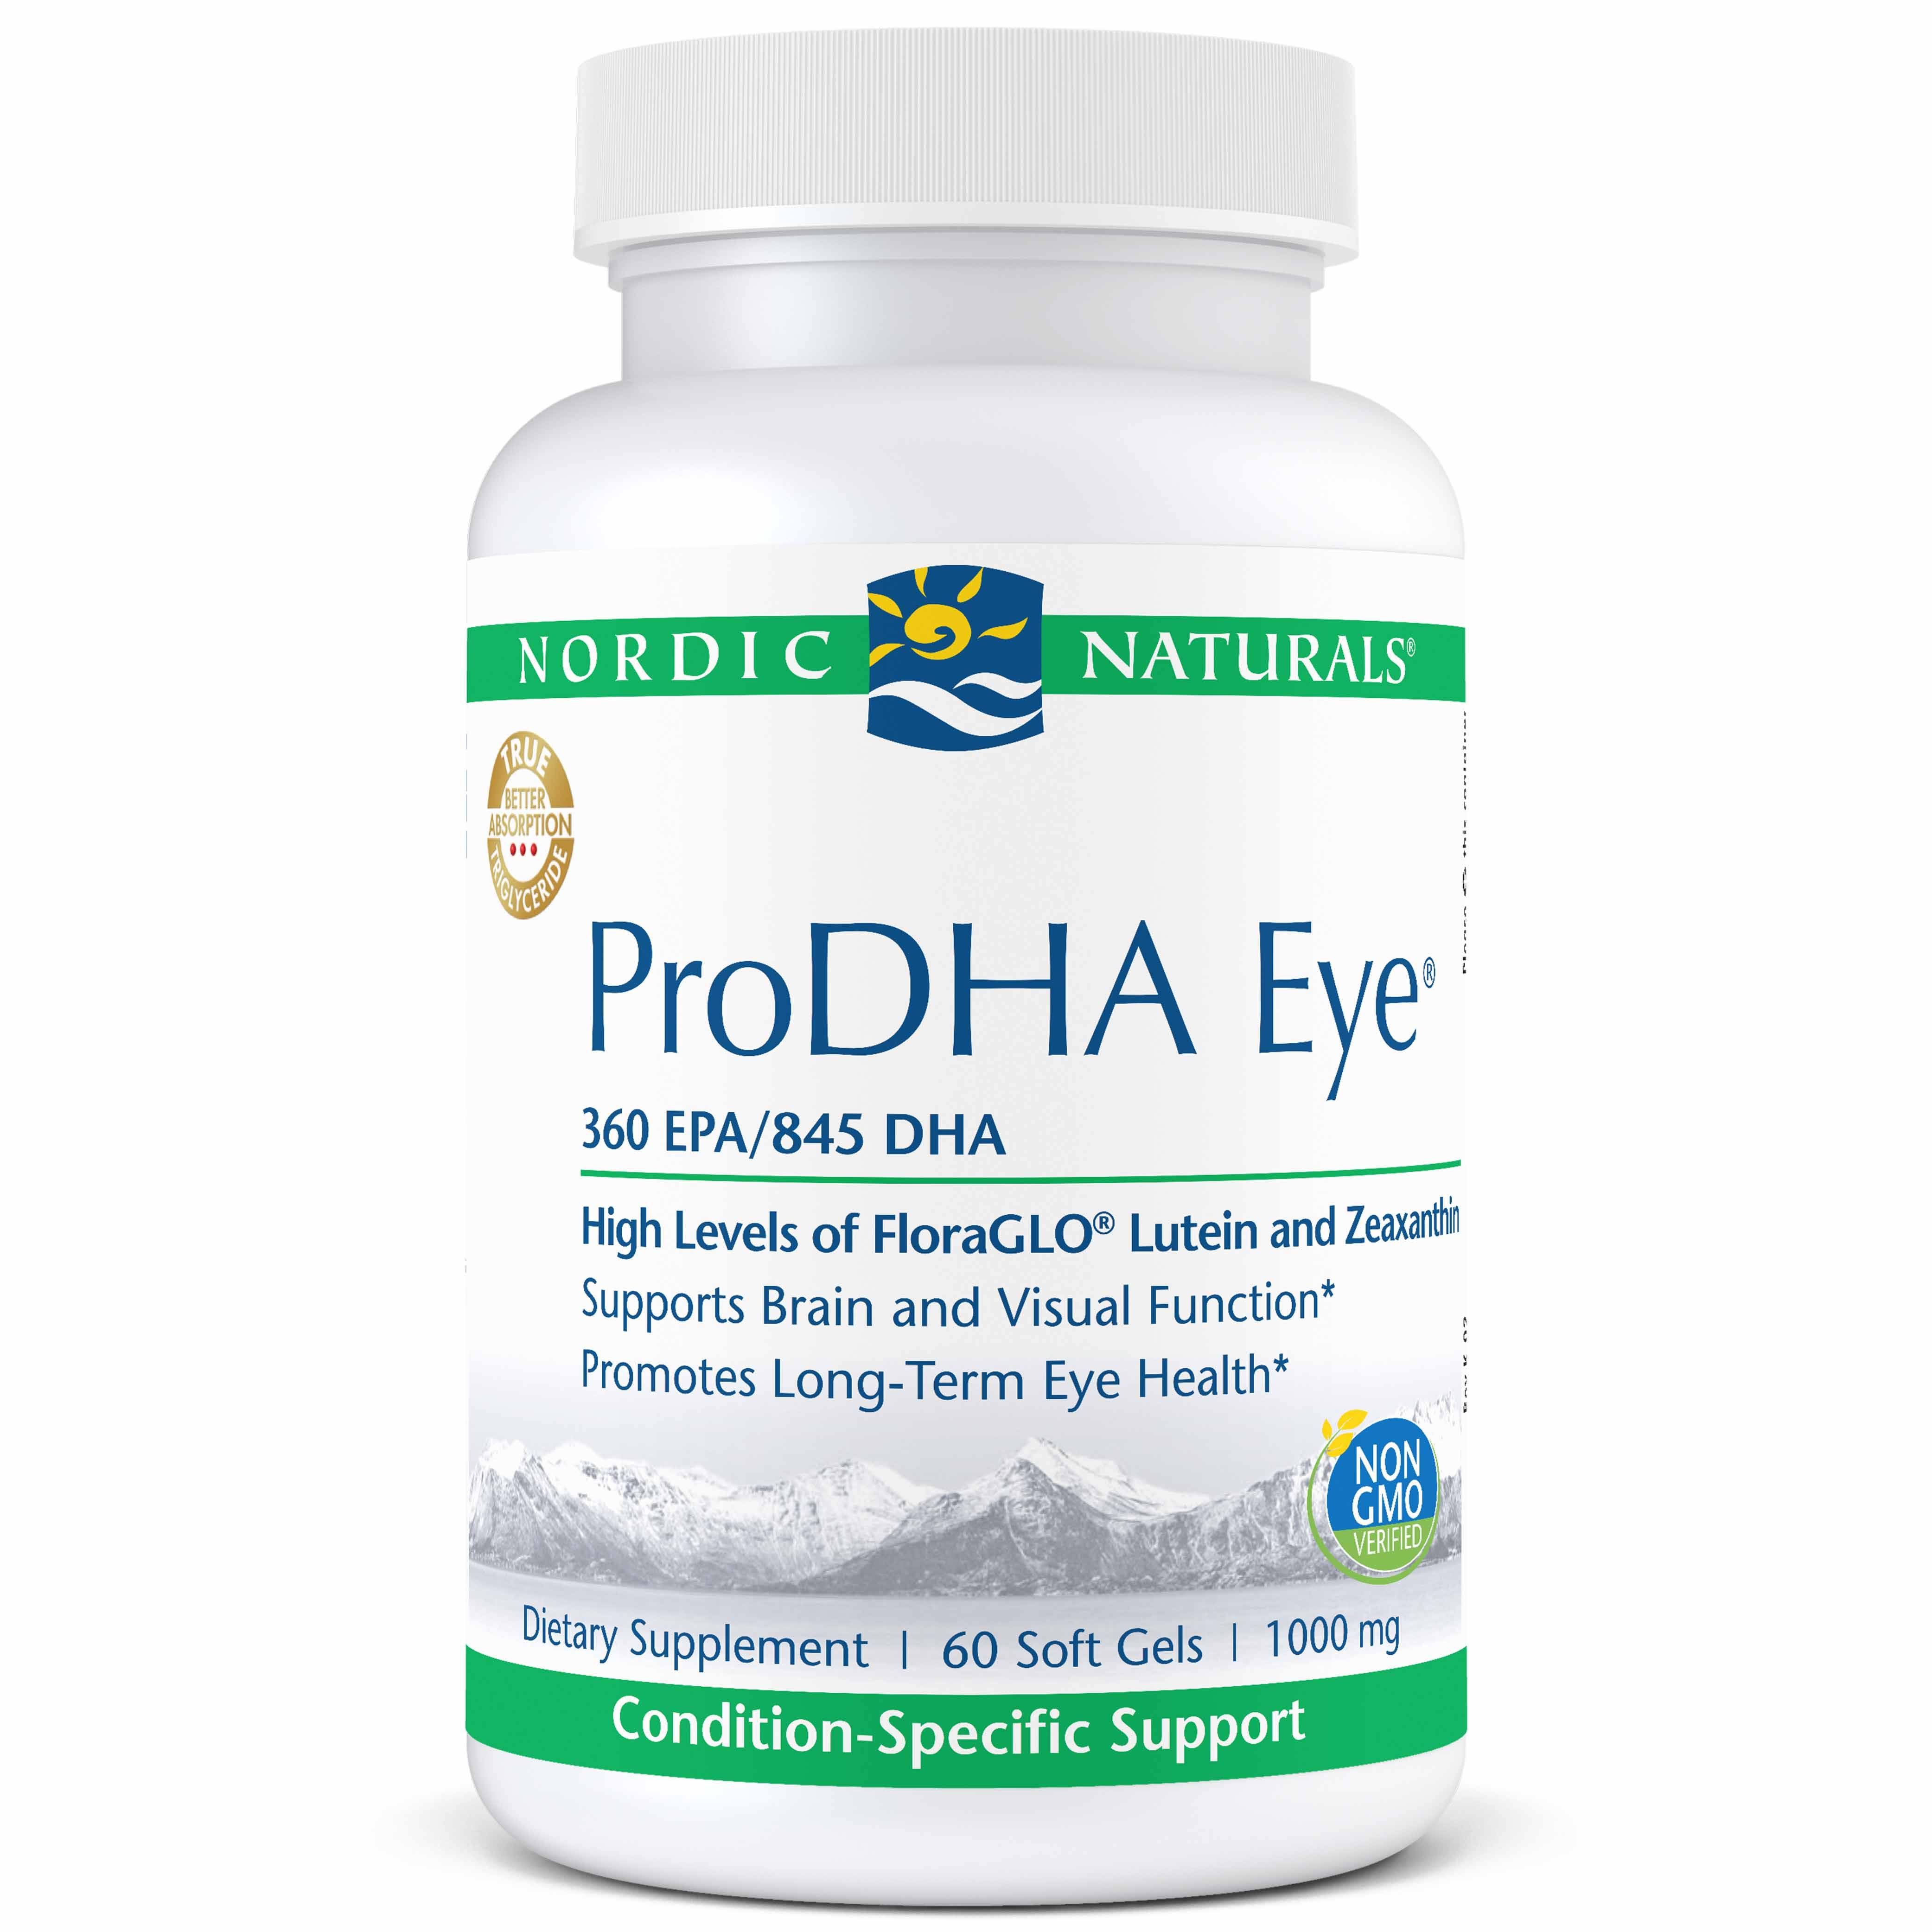 Nordic Naturals Pro Dha Eye Dietary Supplement - 60 Soft Gels